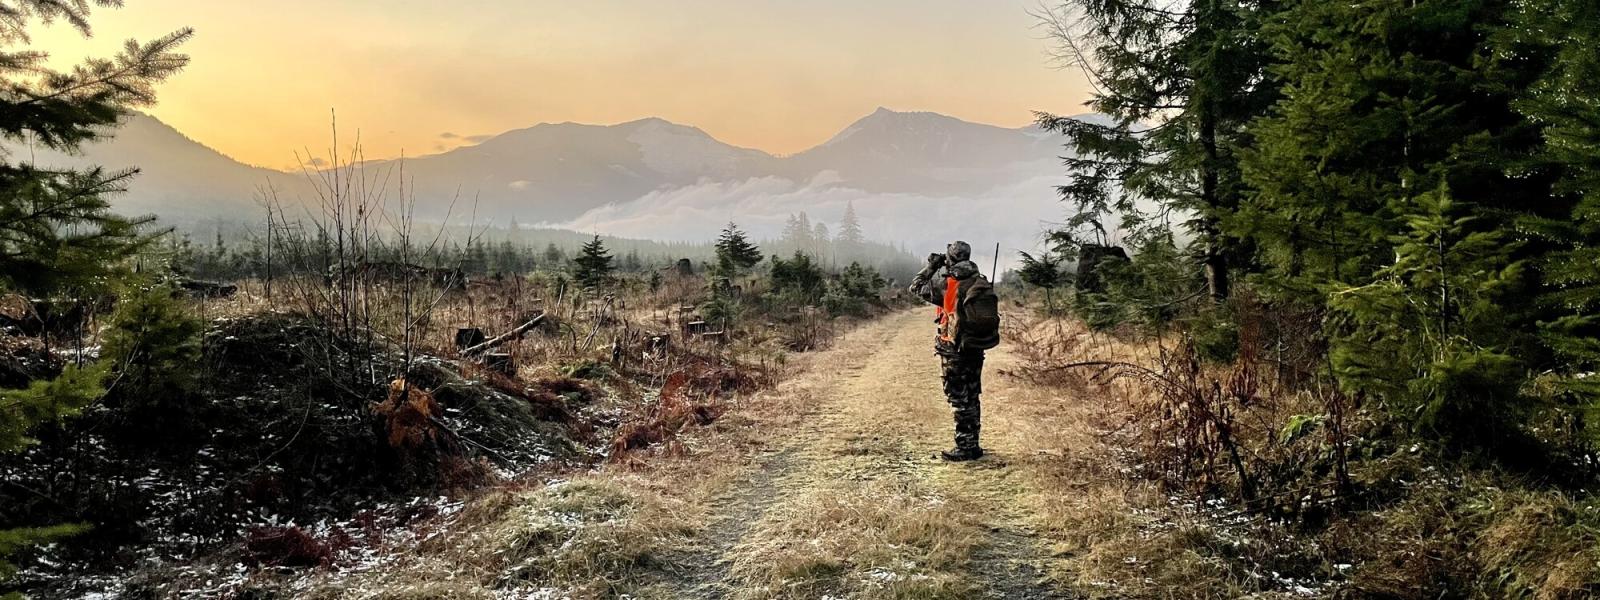 A hunter standing on a gravel road in the forest holding binoculars on a frosty morning